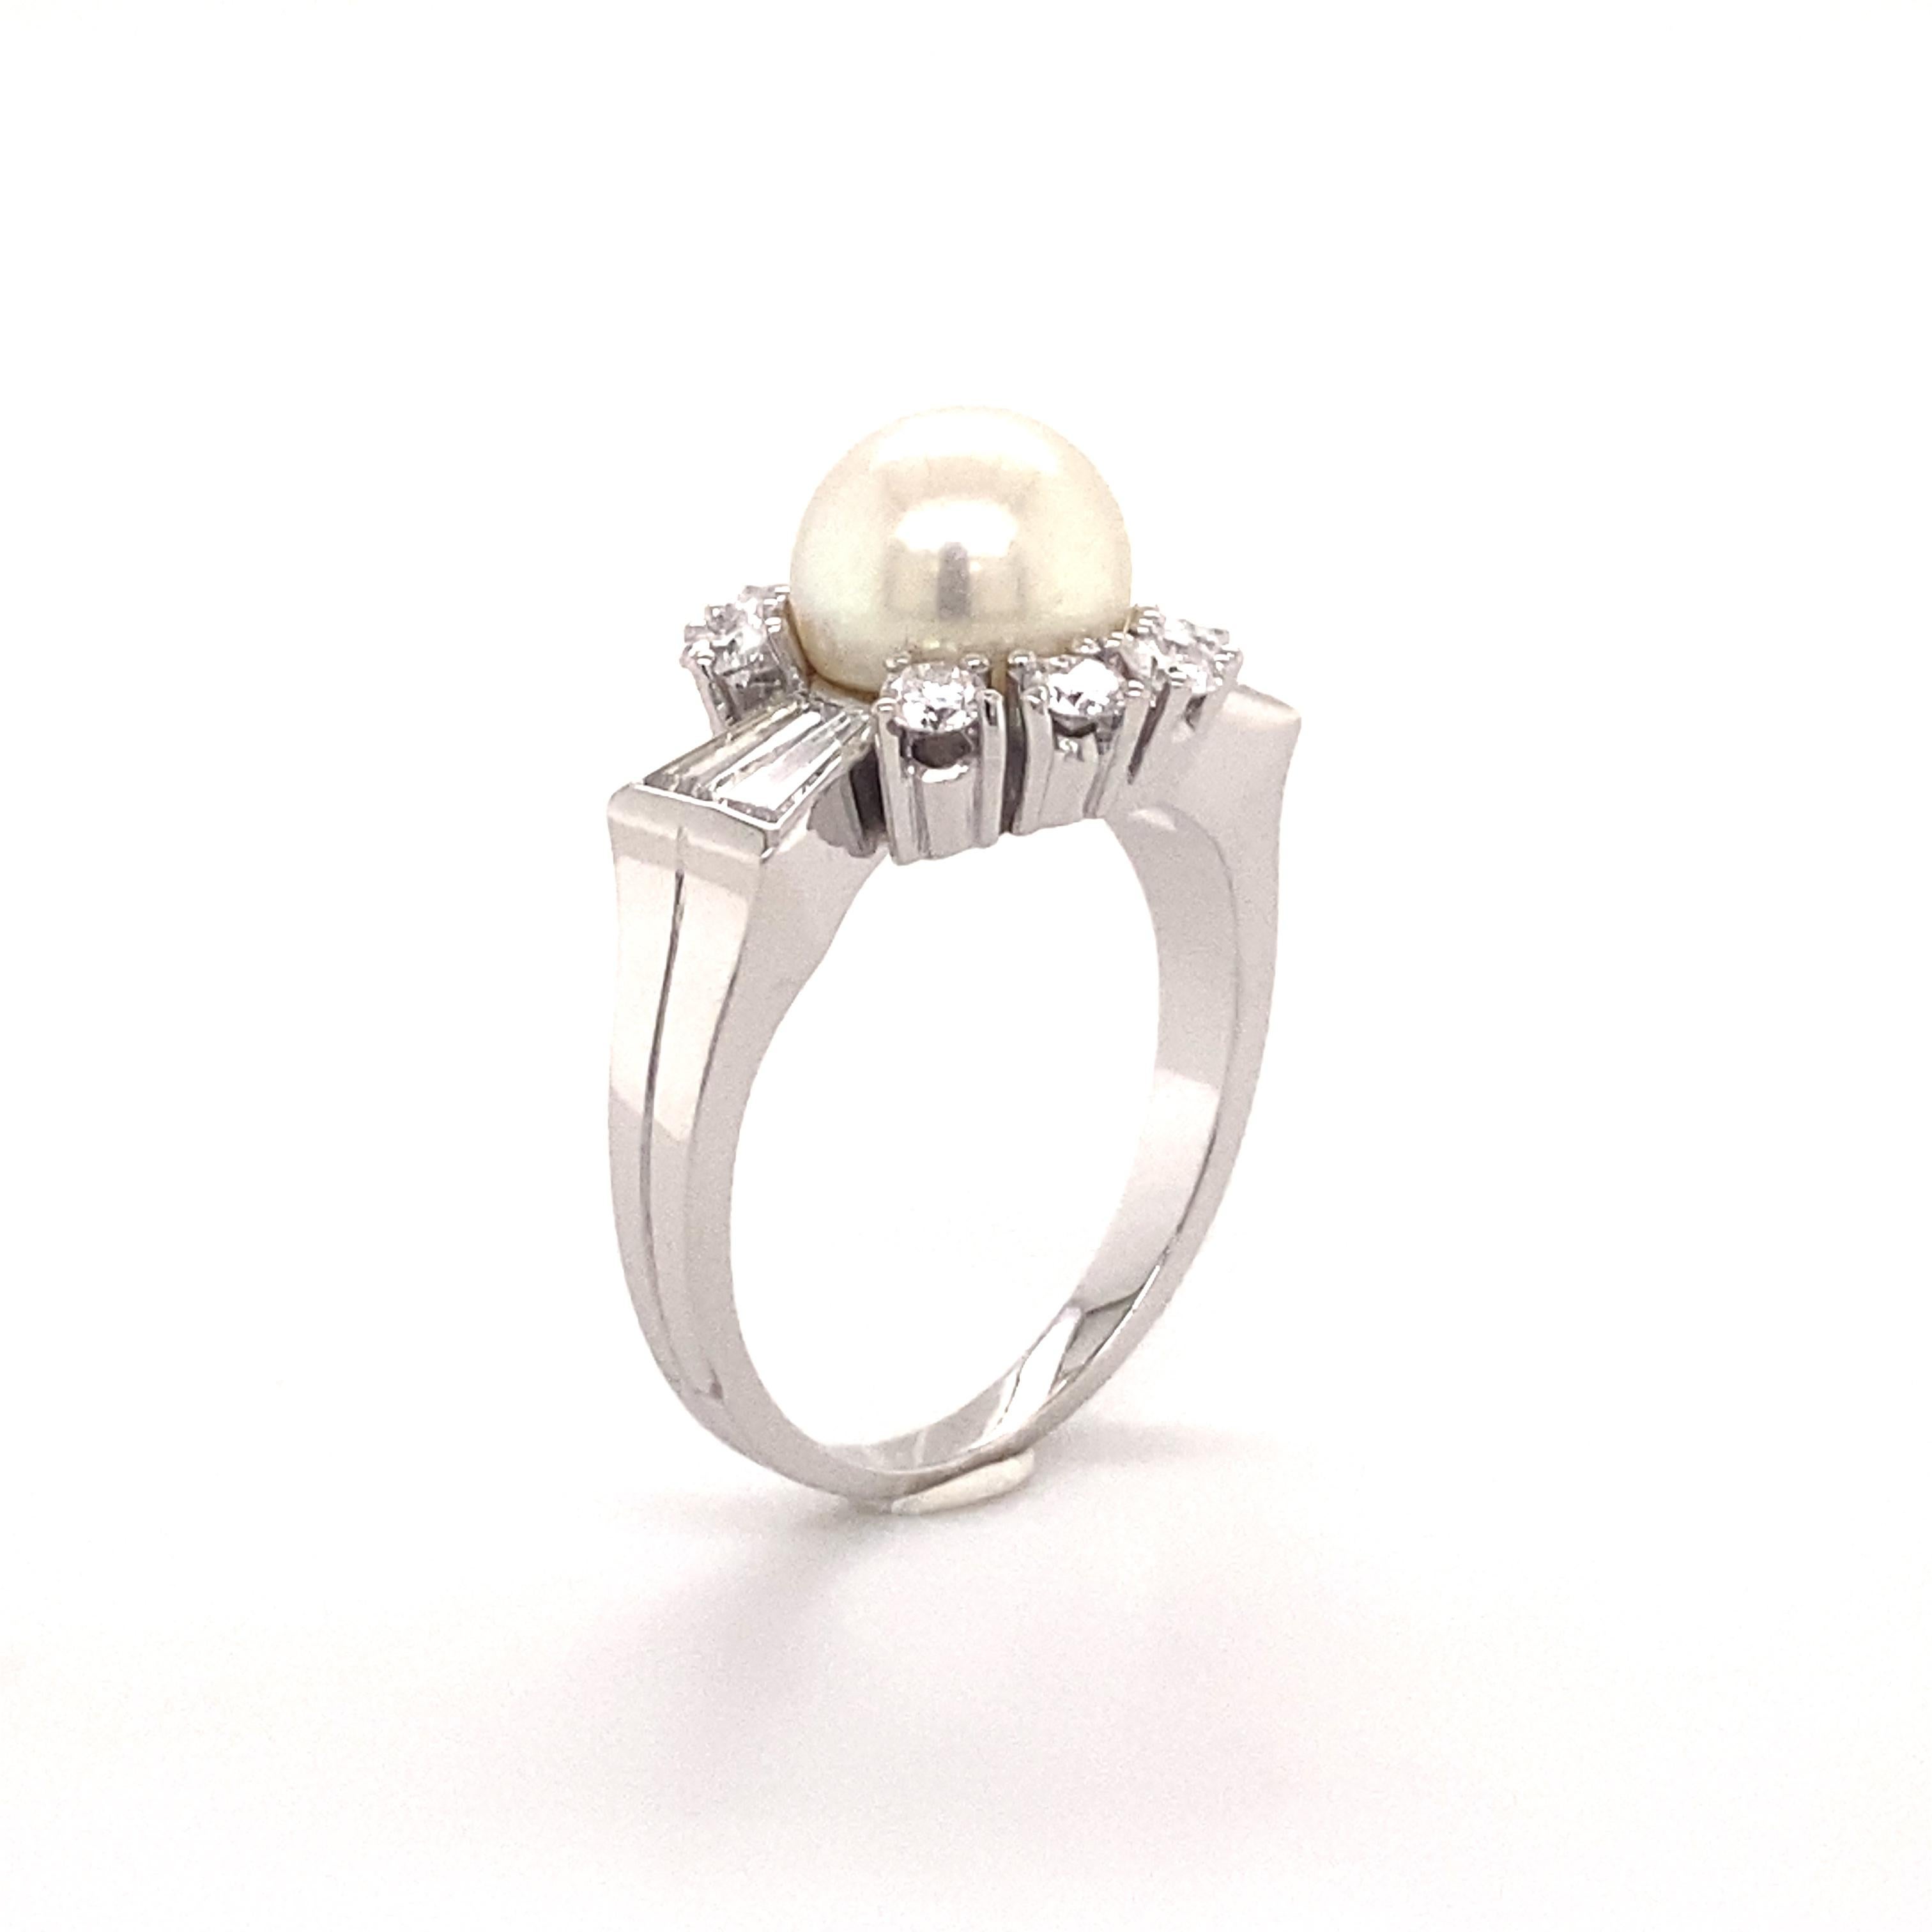 Contemporary Classic Akoya Cultured Pearl and Diamond Ring in 18 Karat White Gold